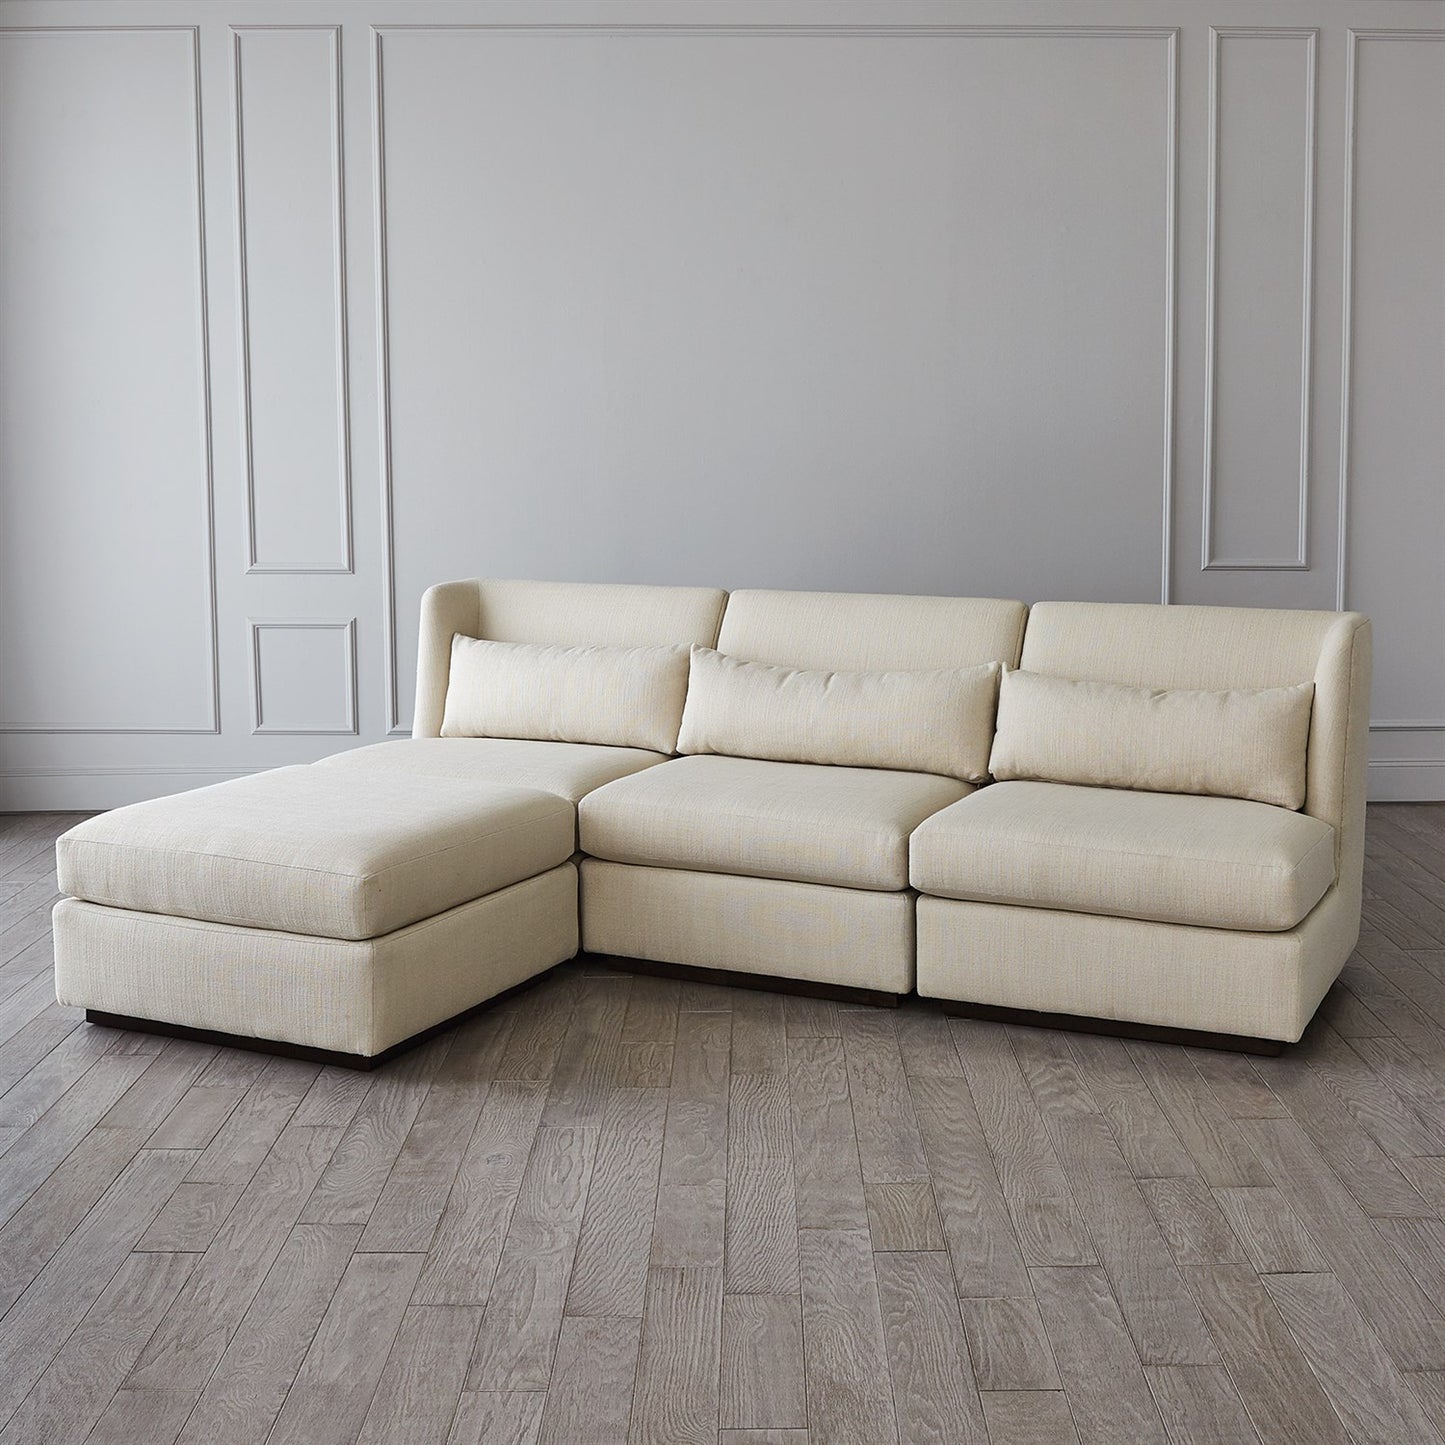 Alder Sectional - Right Arm Section - Moonstone